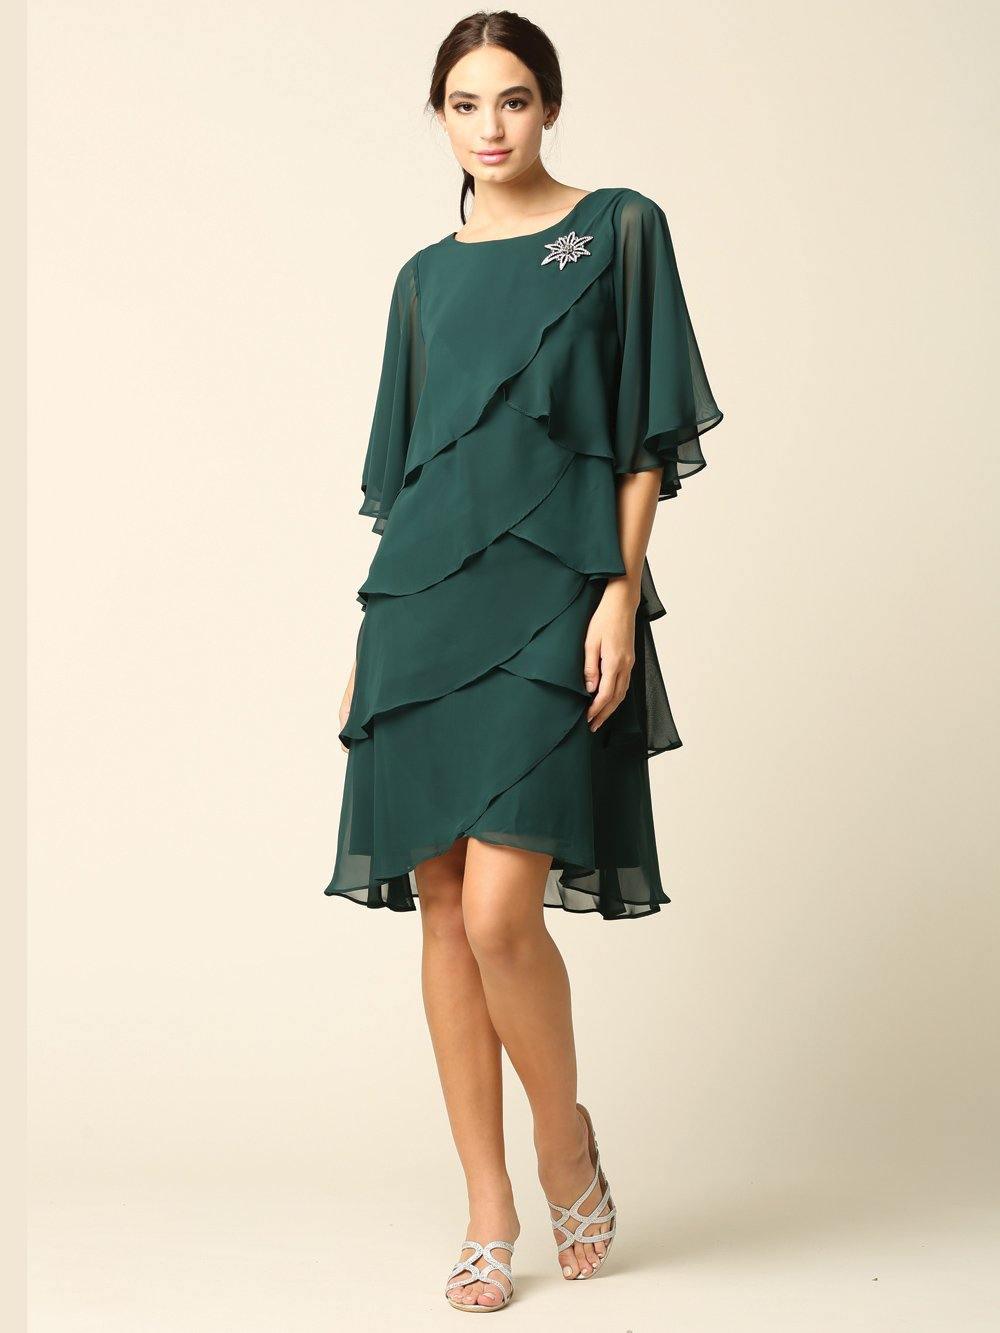 Short Mother of the Bride Chiffon Cocktail Dress - The Dress Outlet Eva Fashion